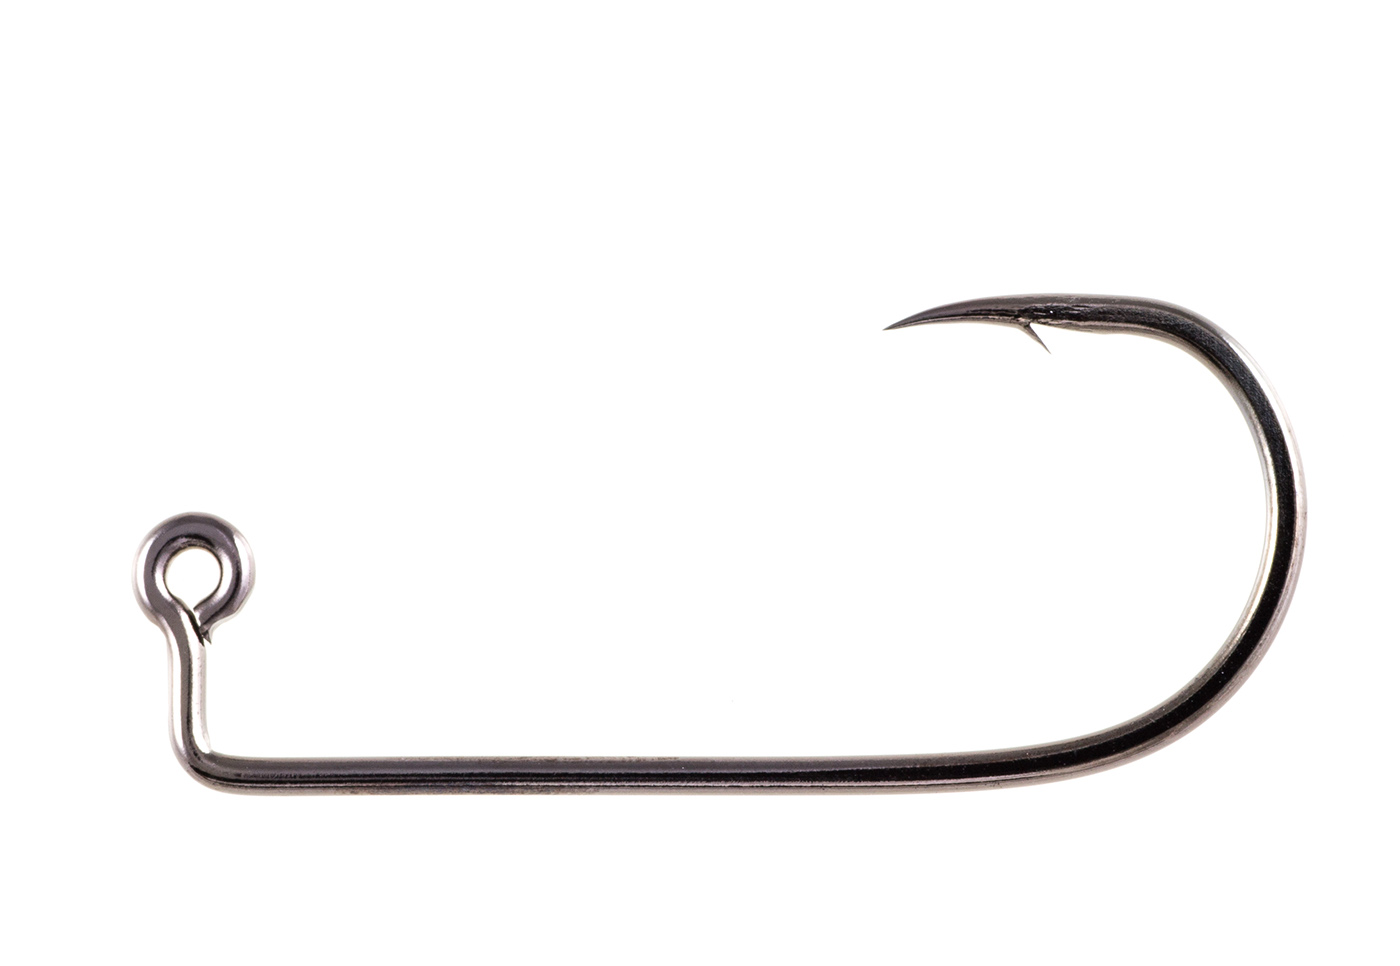 Weekly Sale Flyer Item: Owner 90-Degree 2x Strong #1 Jig Hooks The